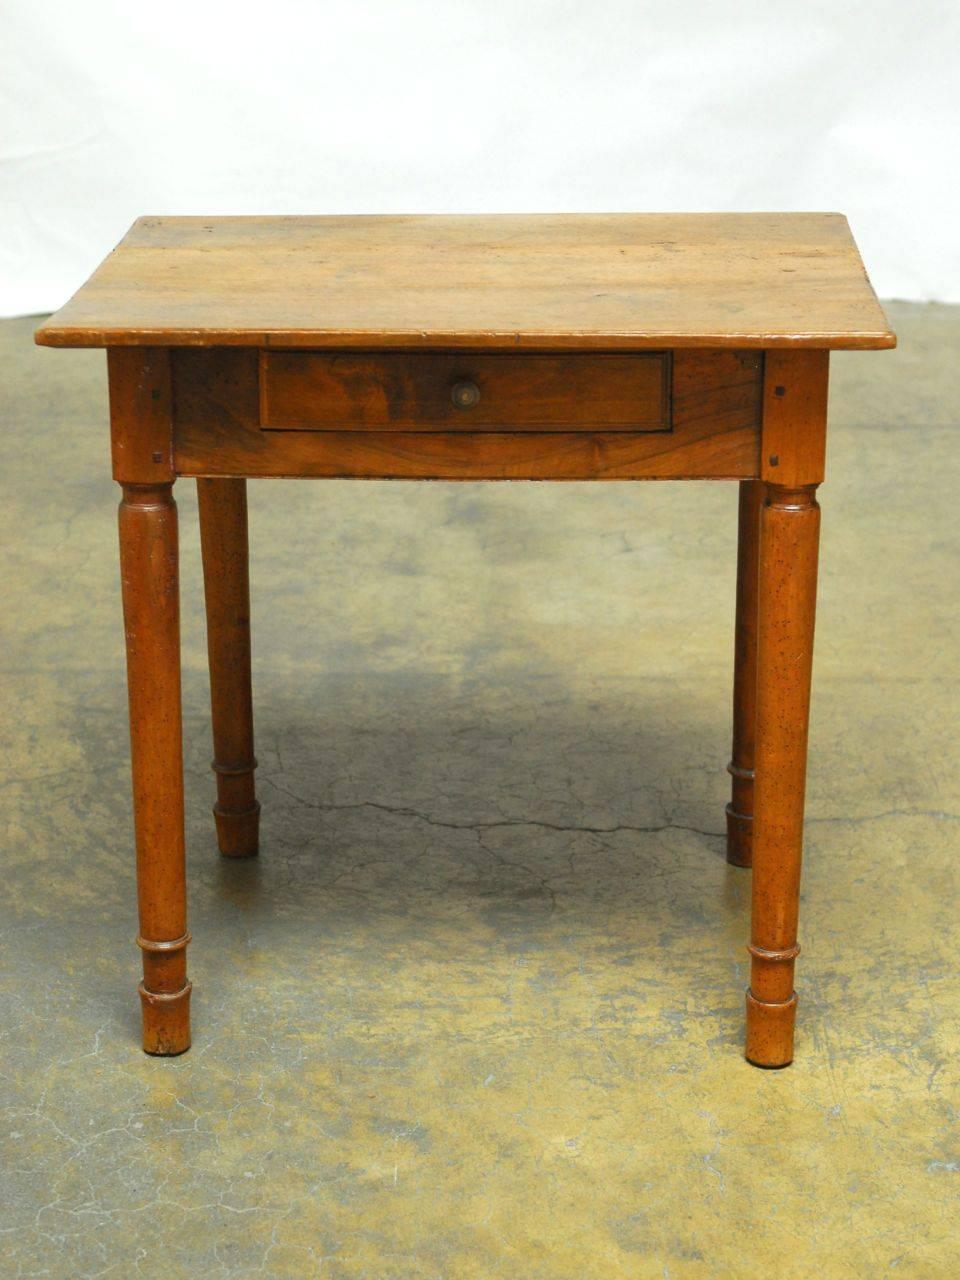 Beautiful 18th century French oak petite desk or work table featuring a single drawer and the original distressed patina that lends character to the piece. Supported by unique round legs and feet and constructed with wood peg joinery. Simple